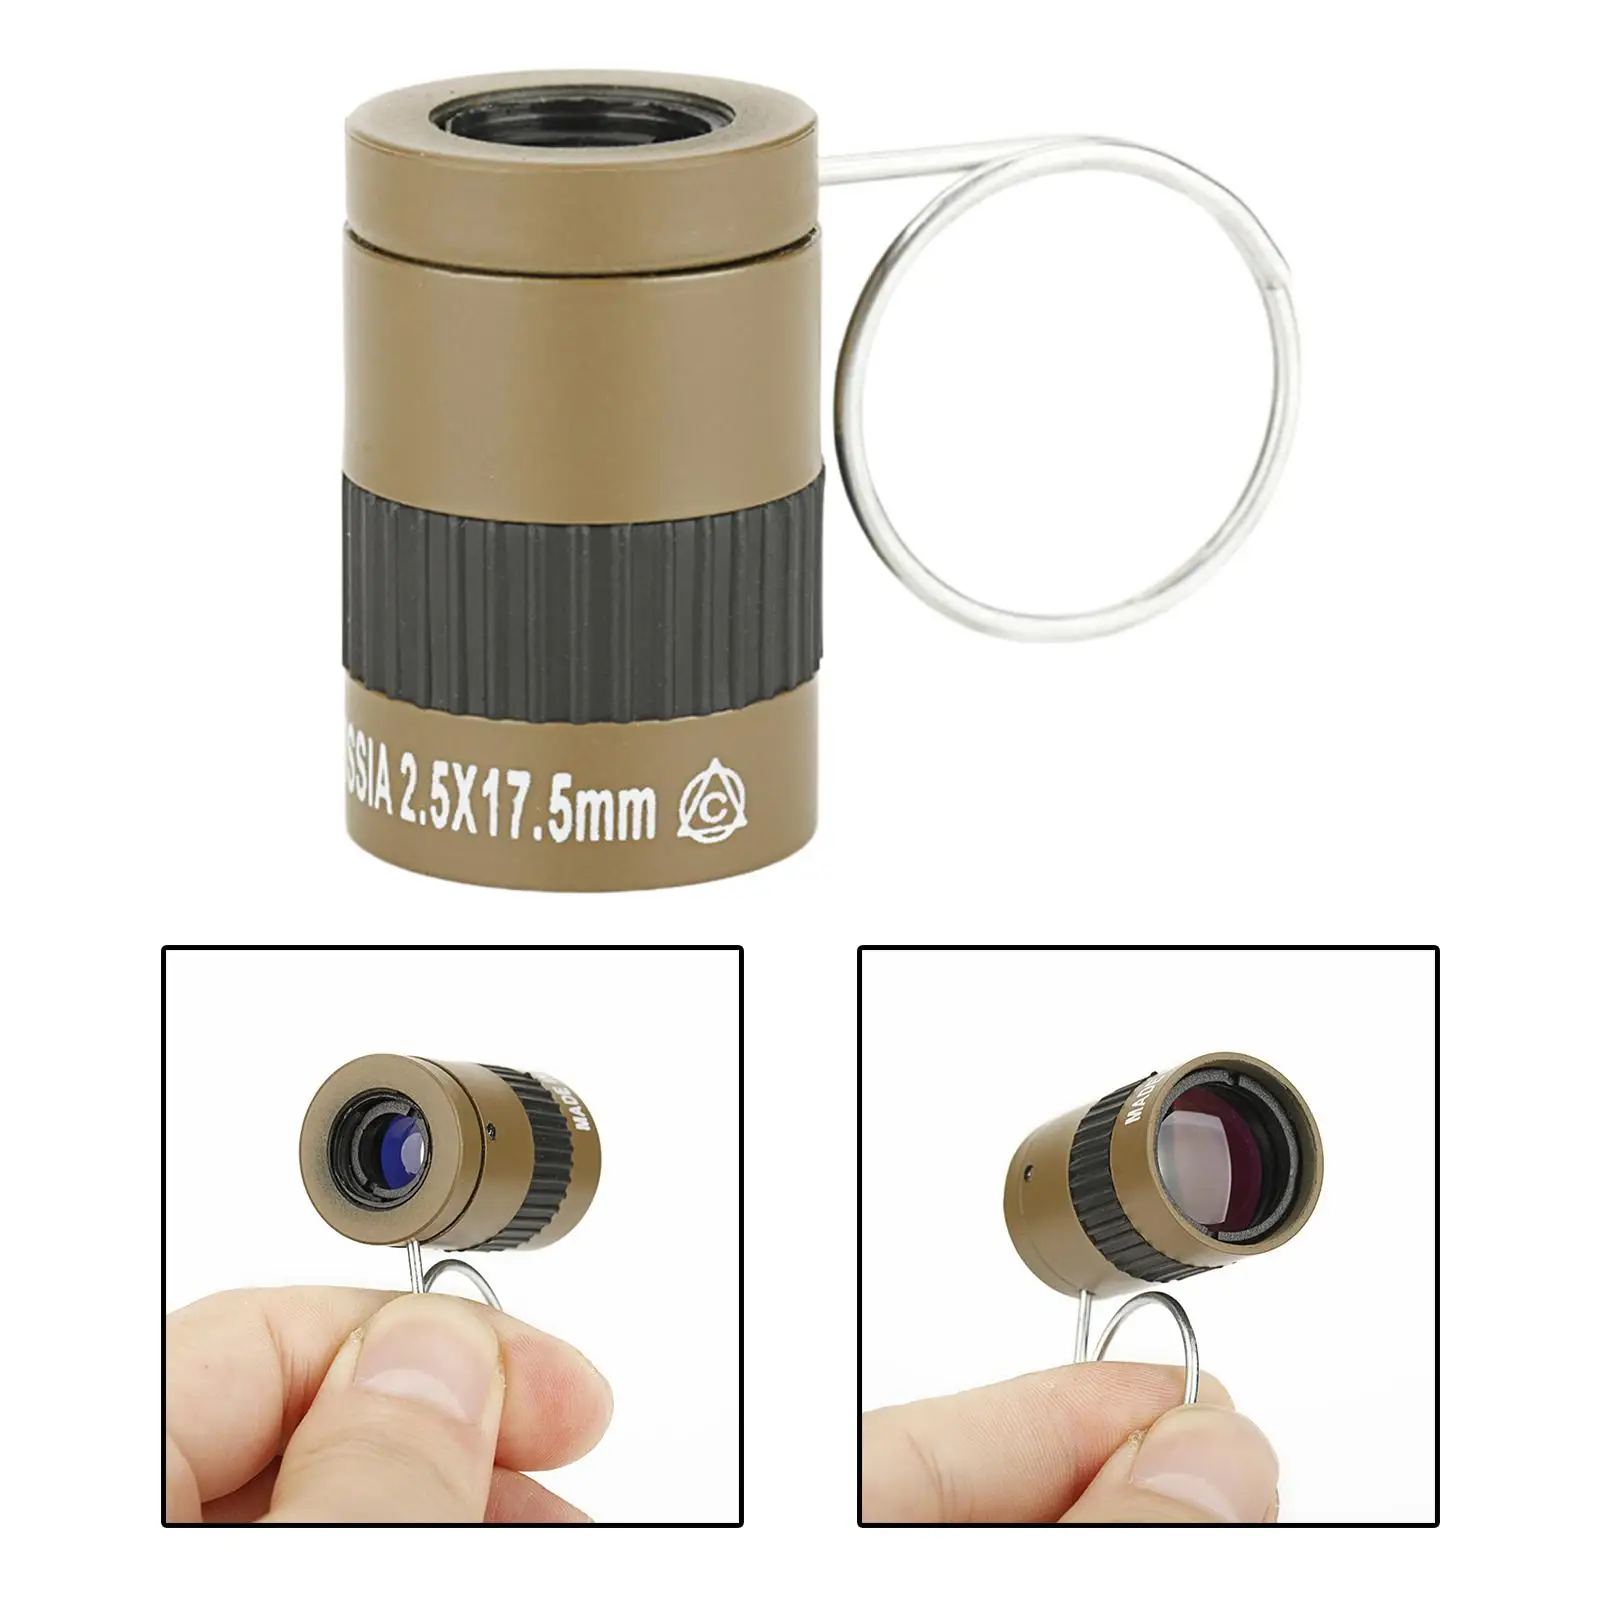 Mini Monocular Telescope 2.5x17.5mm Pocket Lens with Knuckle Finger Ring for Fishing Hunting Hiking Travel